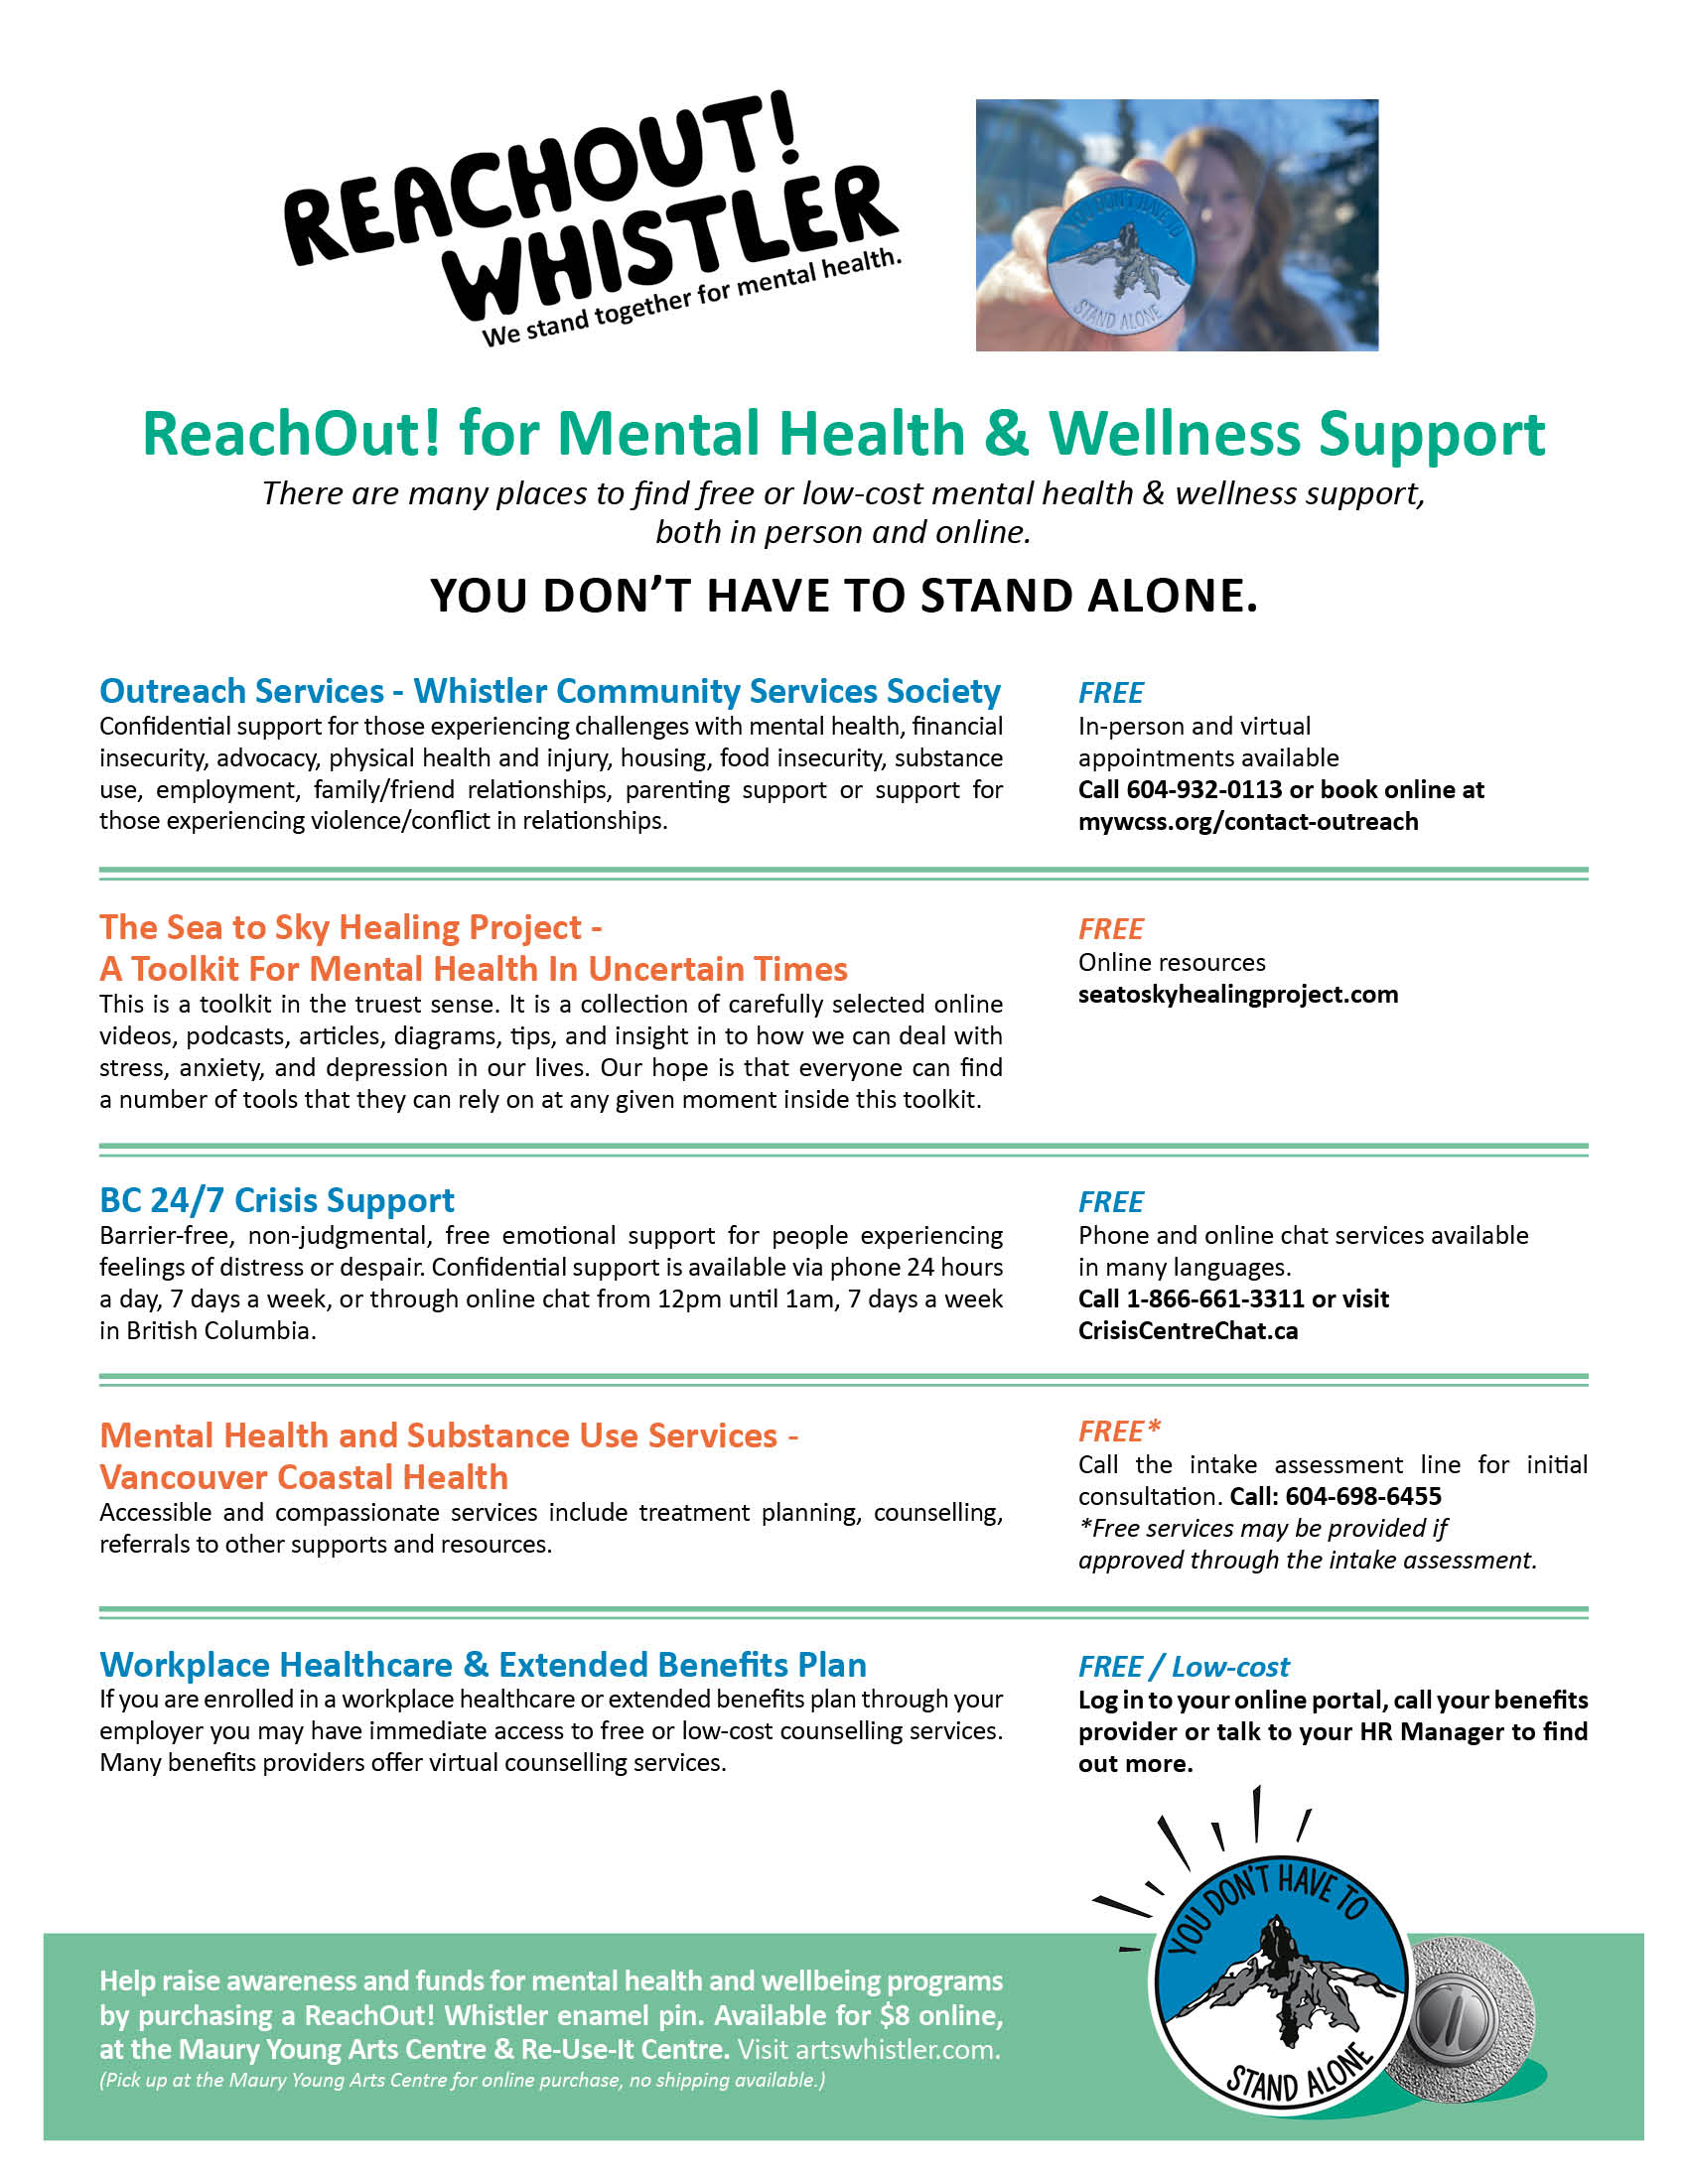 ReachOut! Whistler mental health resources poster